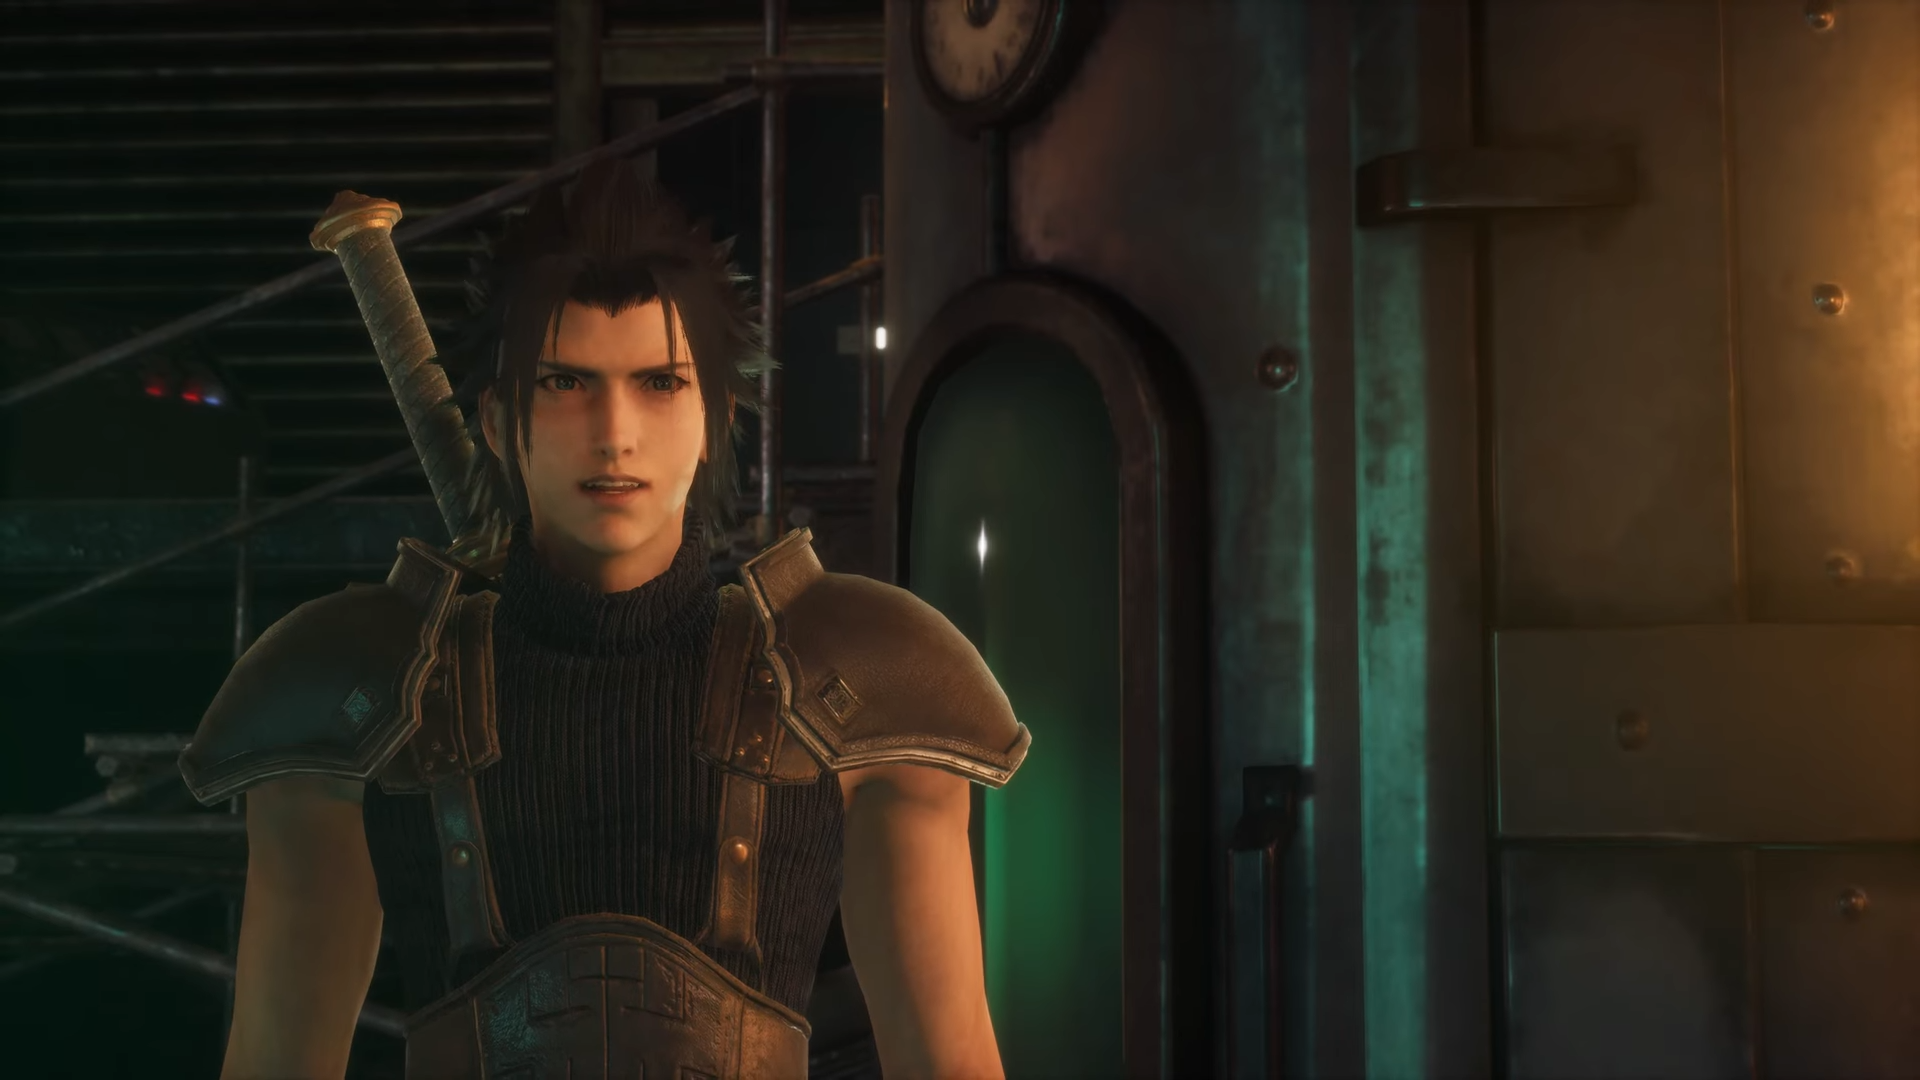 Final Fantasy’s Crisis Core remake launches in December